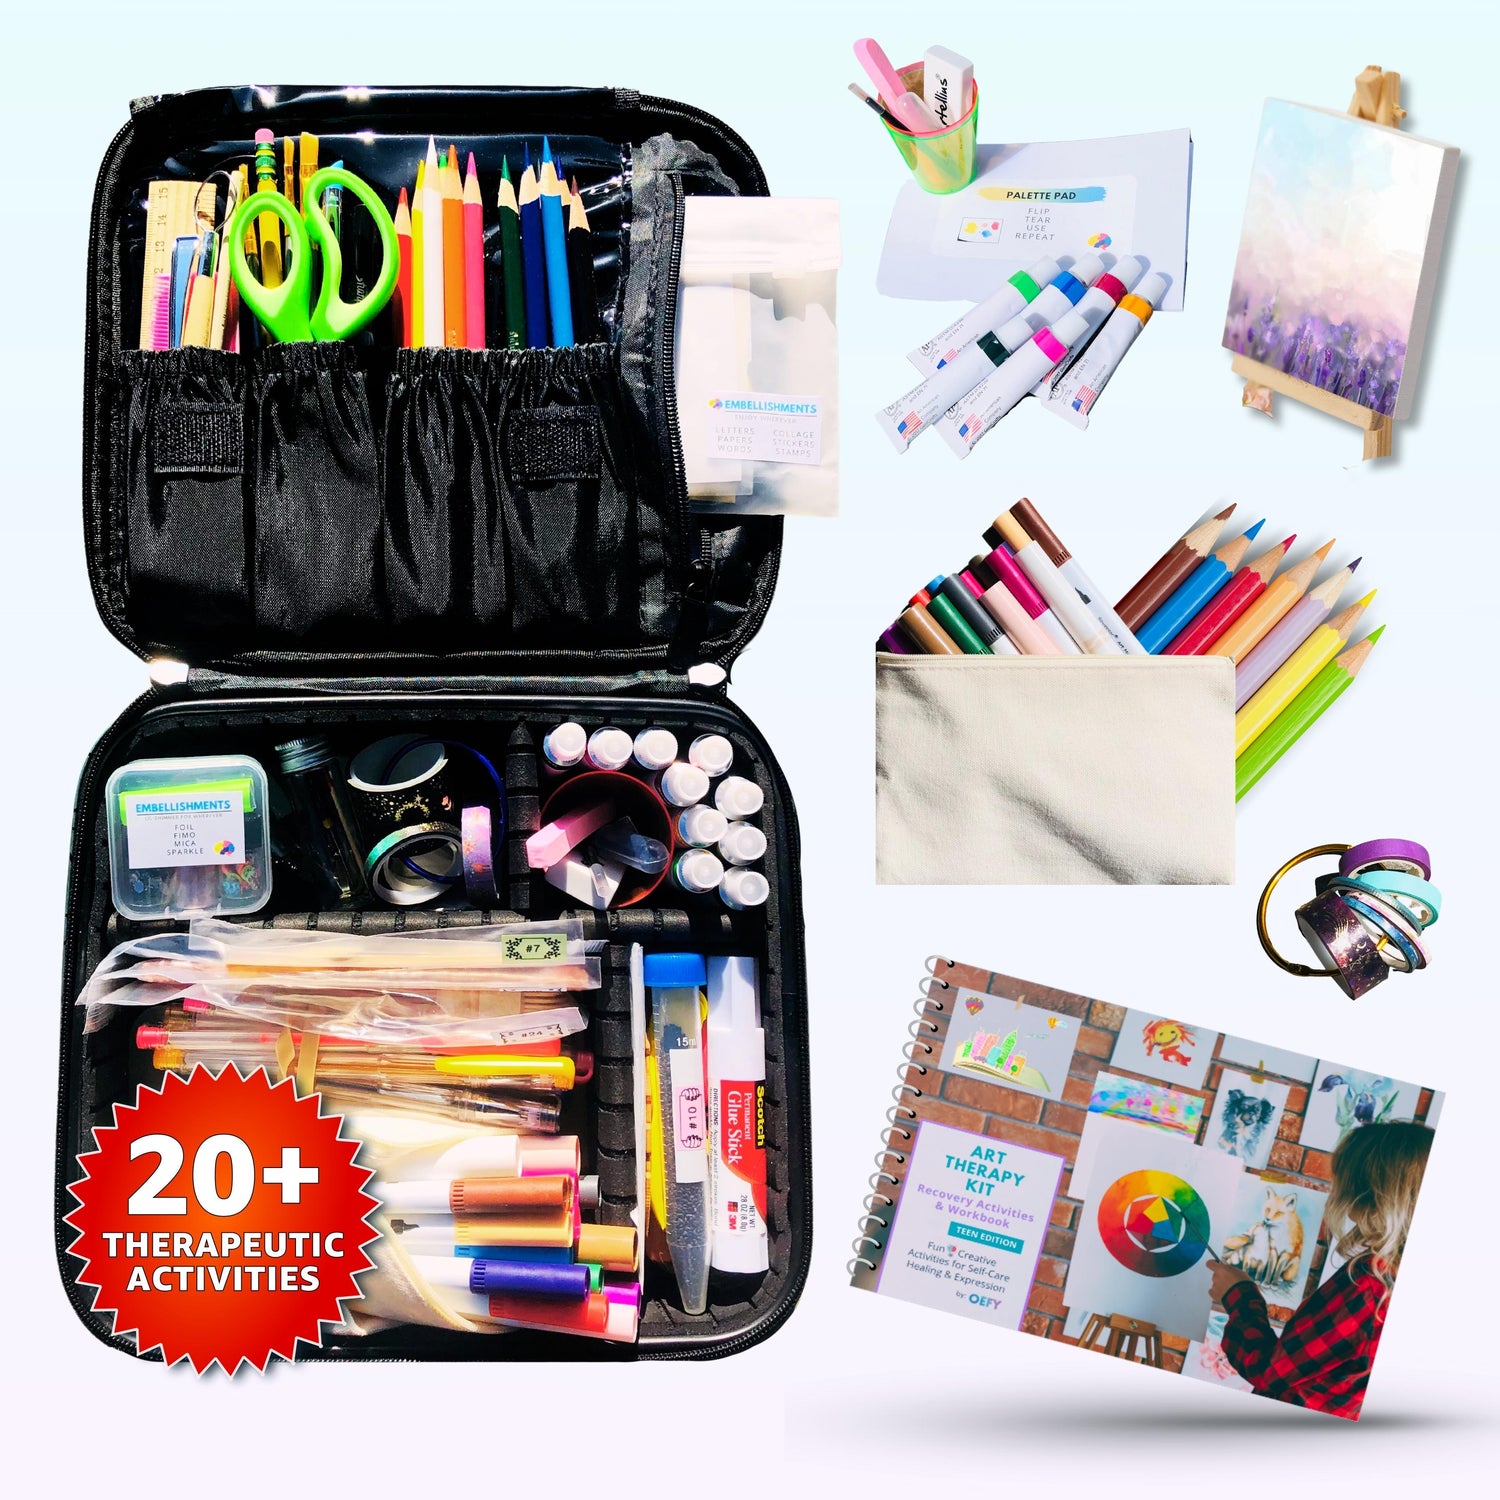 ART THERAPY KIT - 20+ Therapeutic activities - Unlock your creativity and find solace with our unique art therapy kit. Engage in art activities that soothe anxiety, help you develop coping skills, and stimulate neuroplasticity.